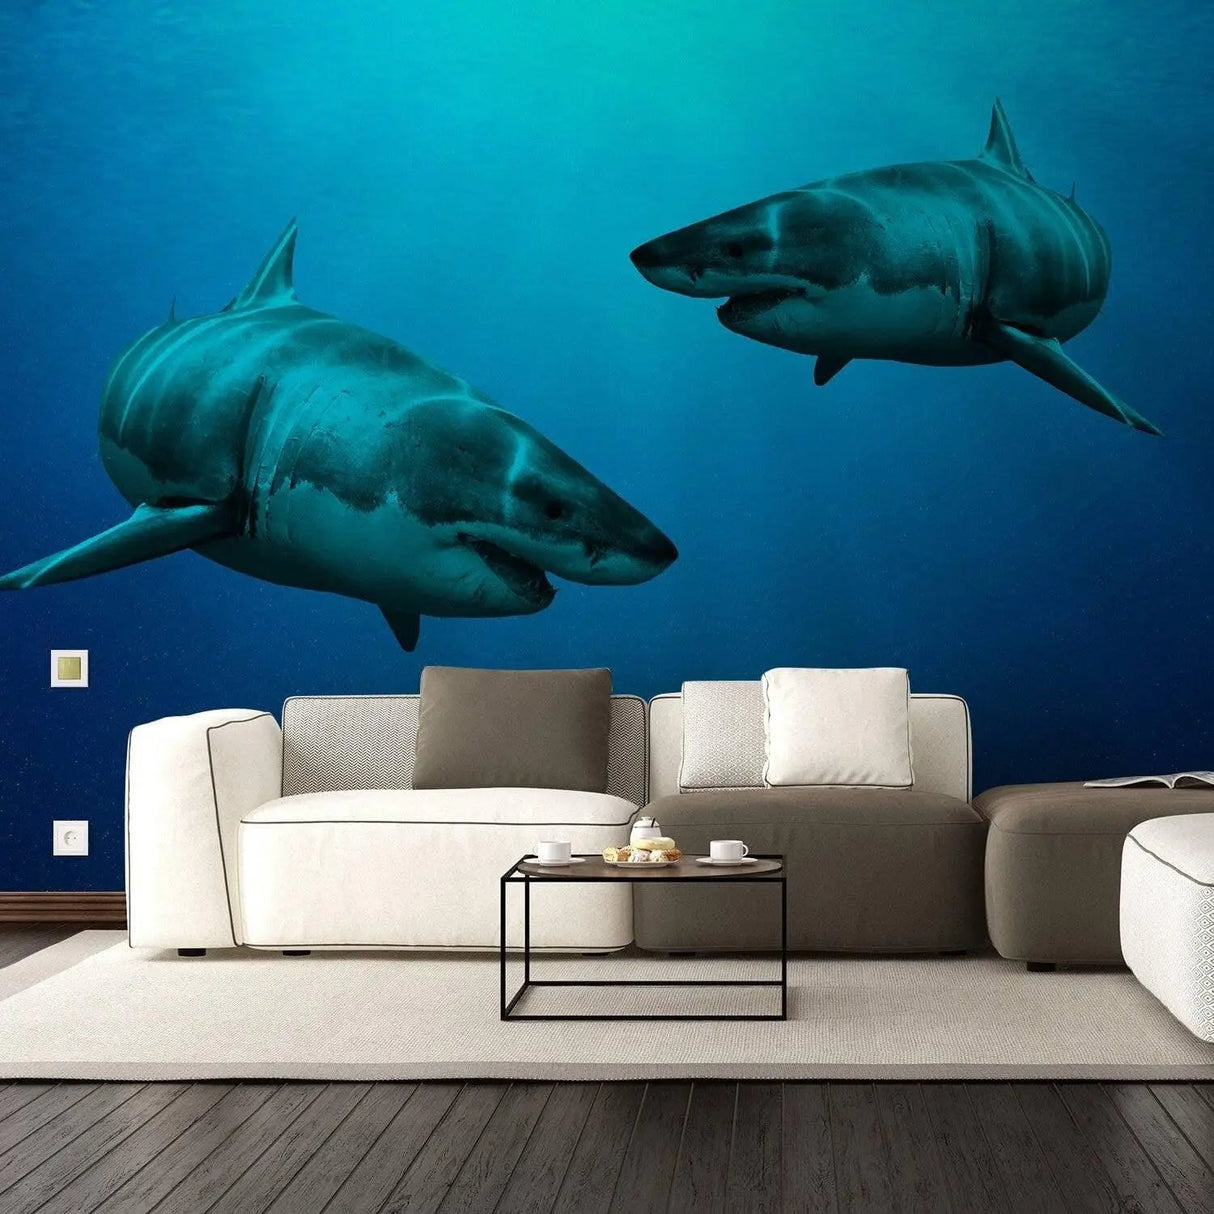 Wallpaper Shark Decor Sticker - 3d Underwater Ocean Wall Stickers Removable Decal - Under Sea Home Bedroom Adhesive Decorations Art Mural - Decords